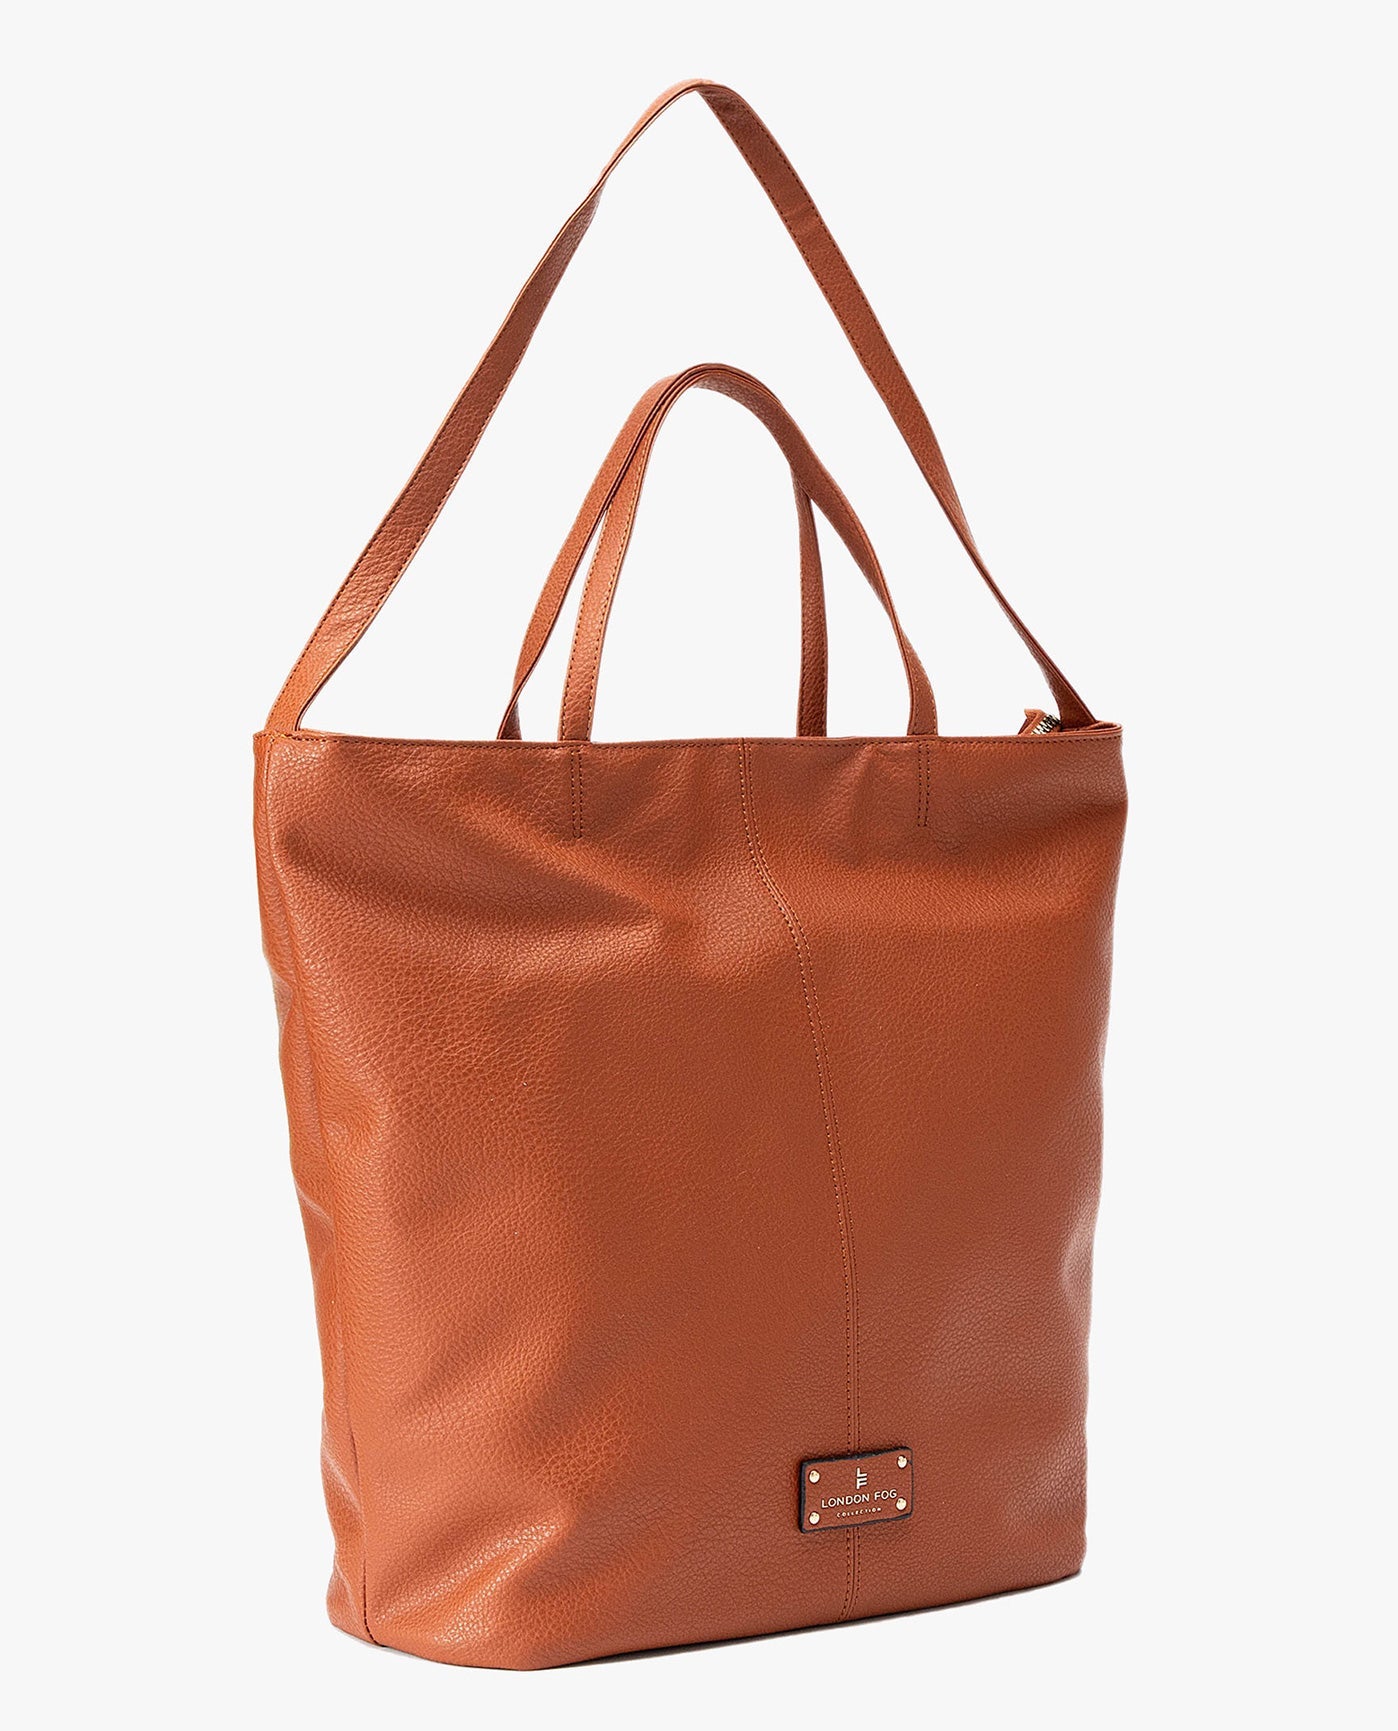 SIDE OF LAURA LARGE TOTE | COGNAC